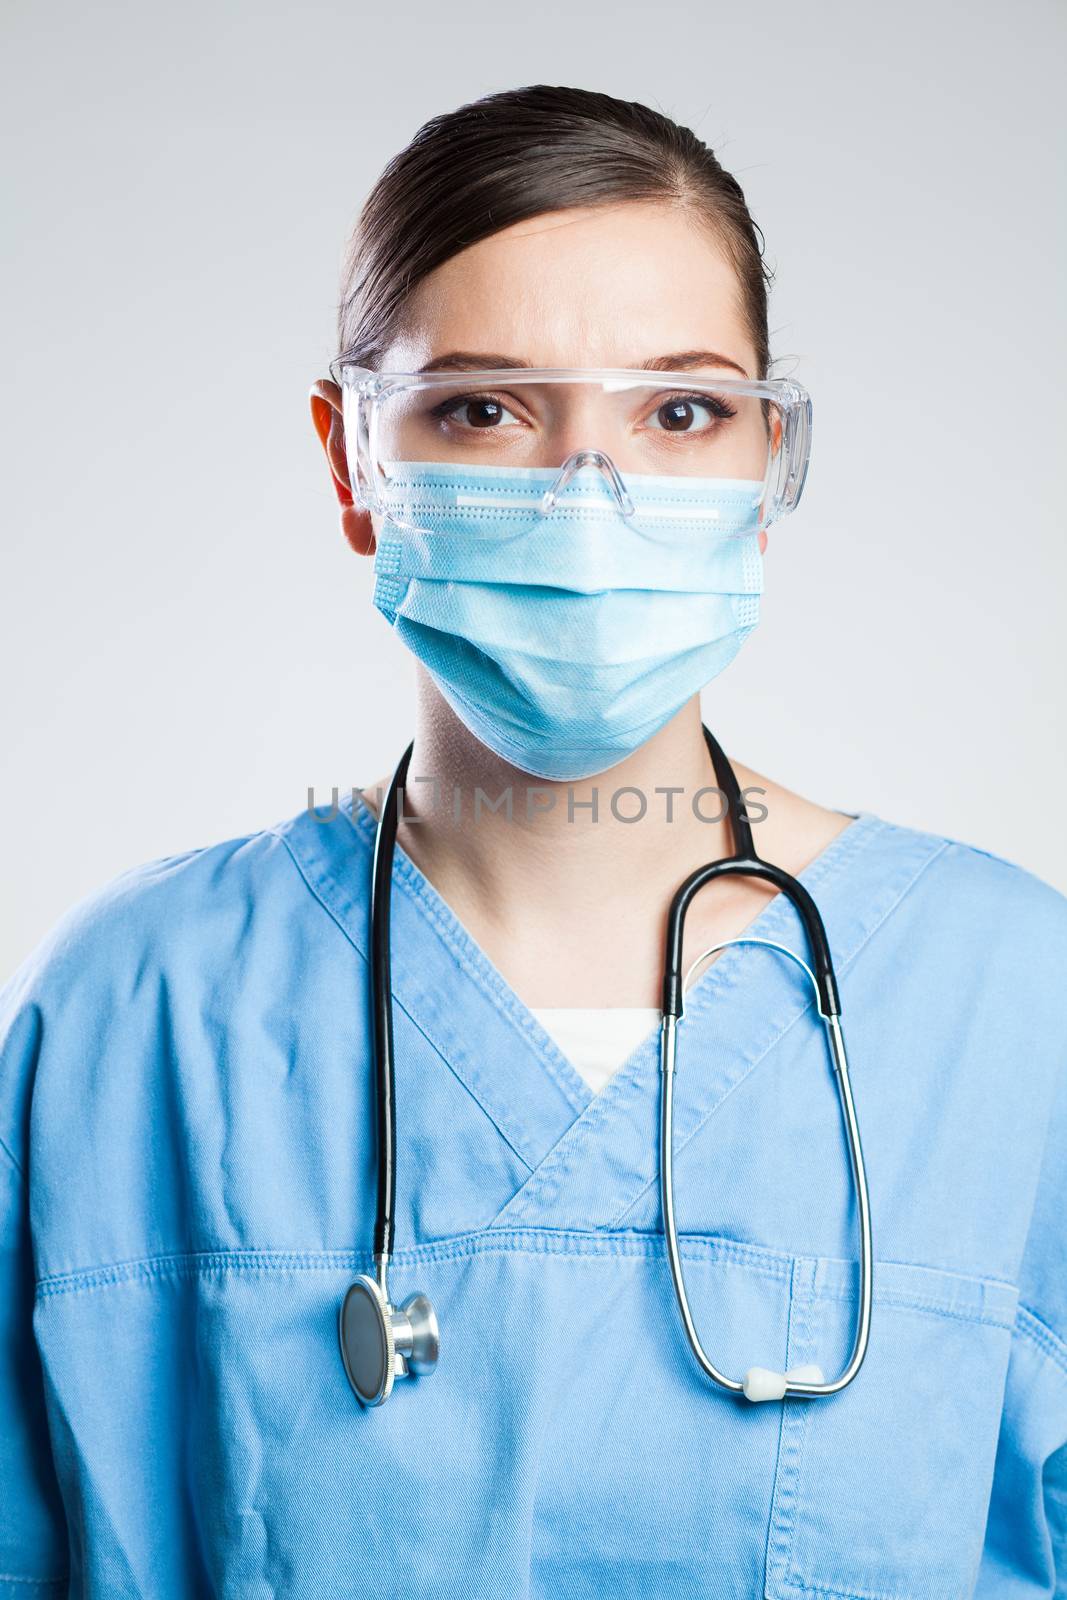 Young serious female EMS key worker doctor by Plyushkin